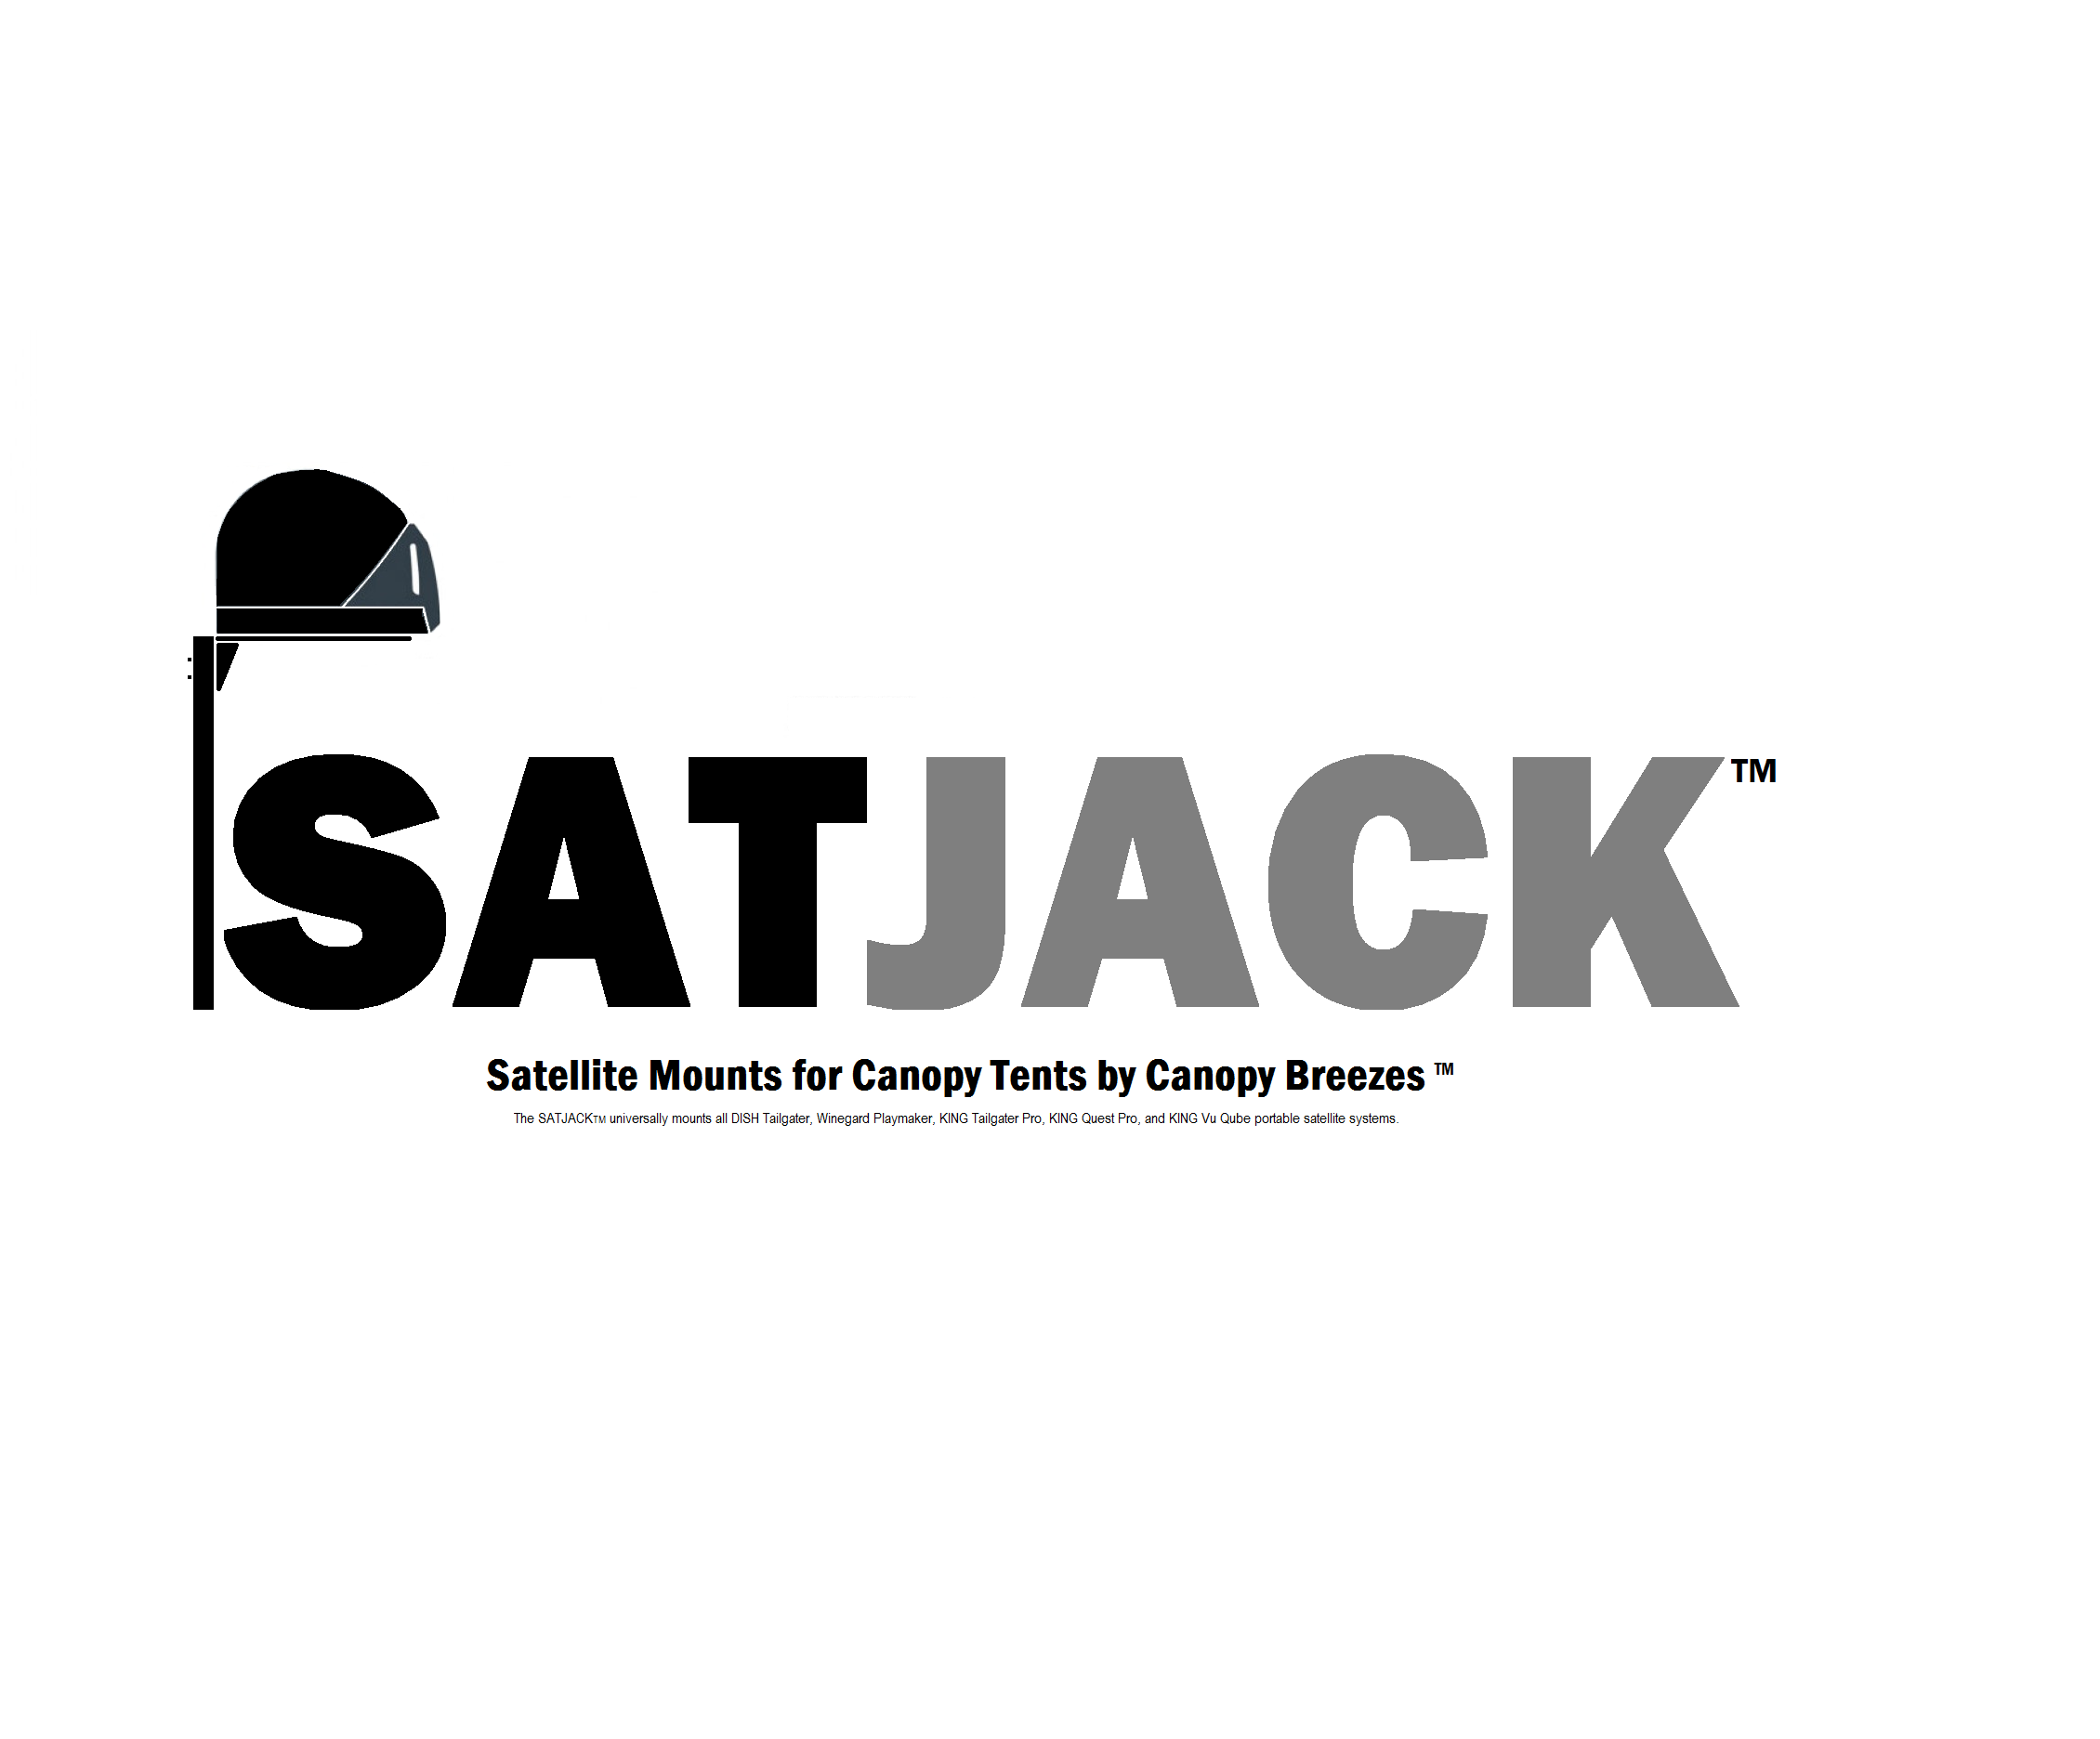 The SATJACK™